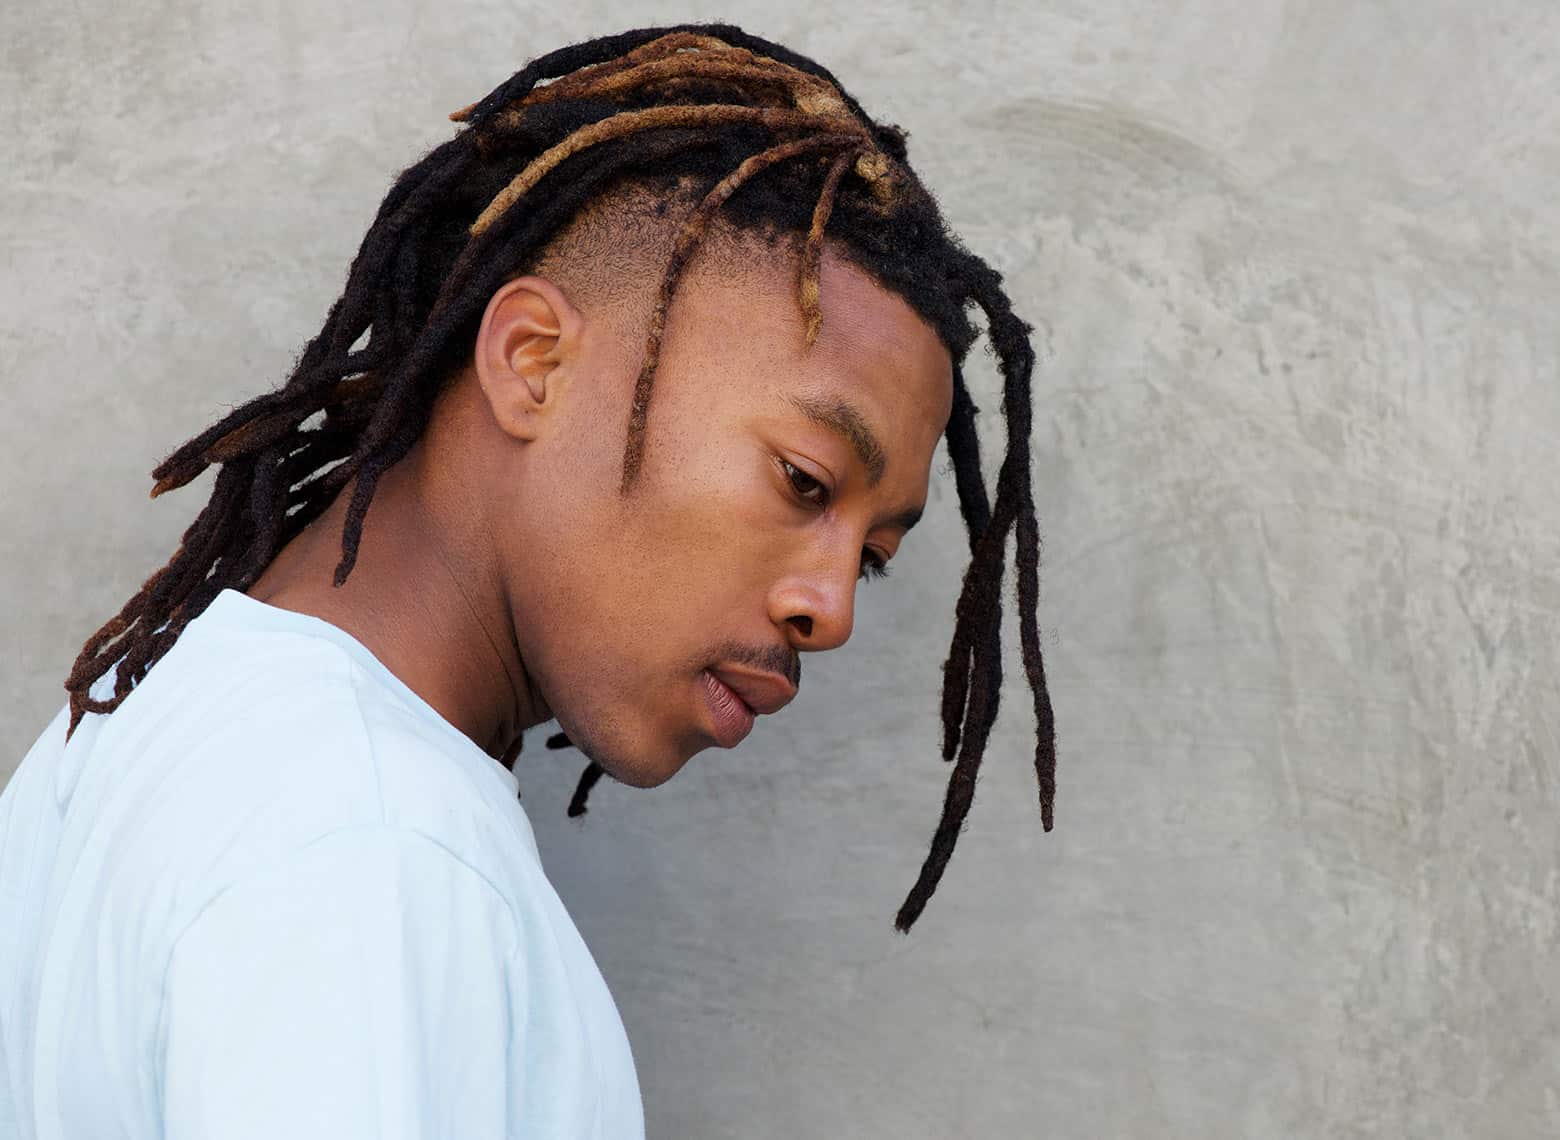 man with dreads and undercut